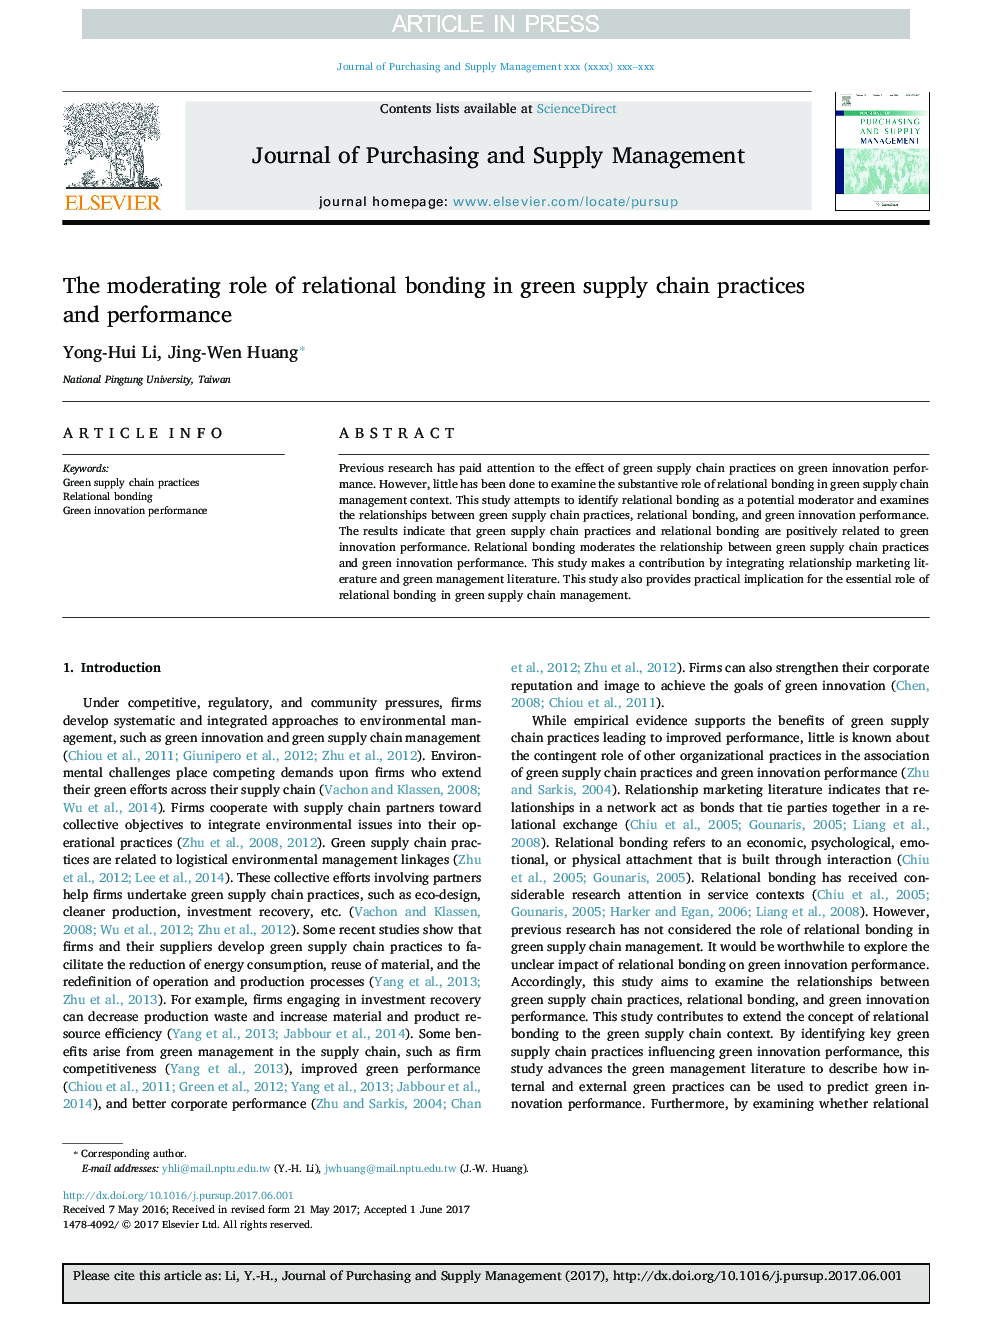 The moderating role of relational bonding in green supply chain practices and performance